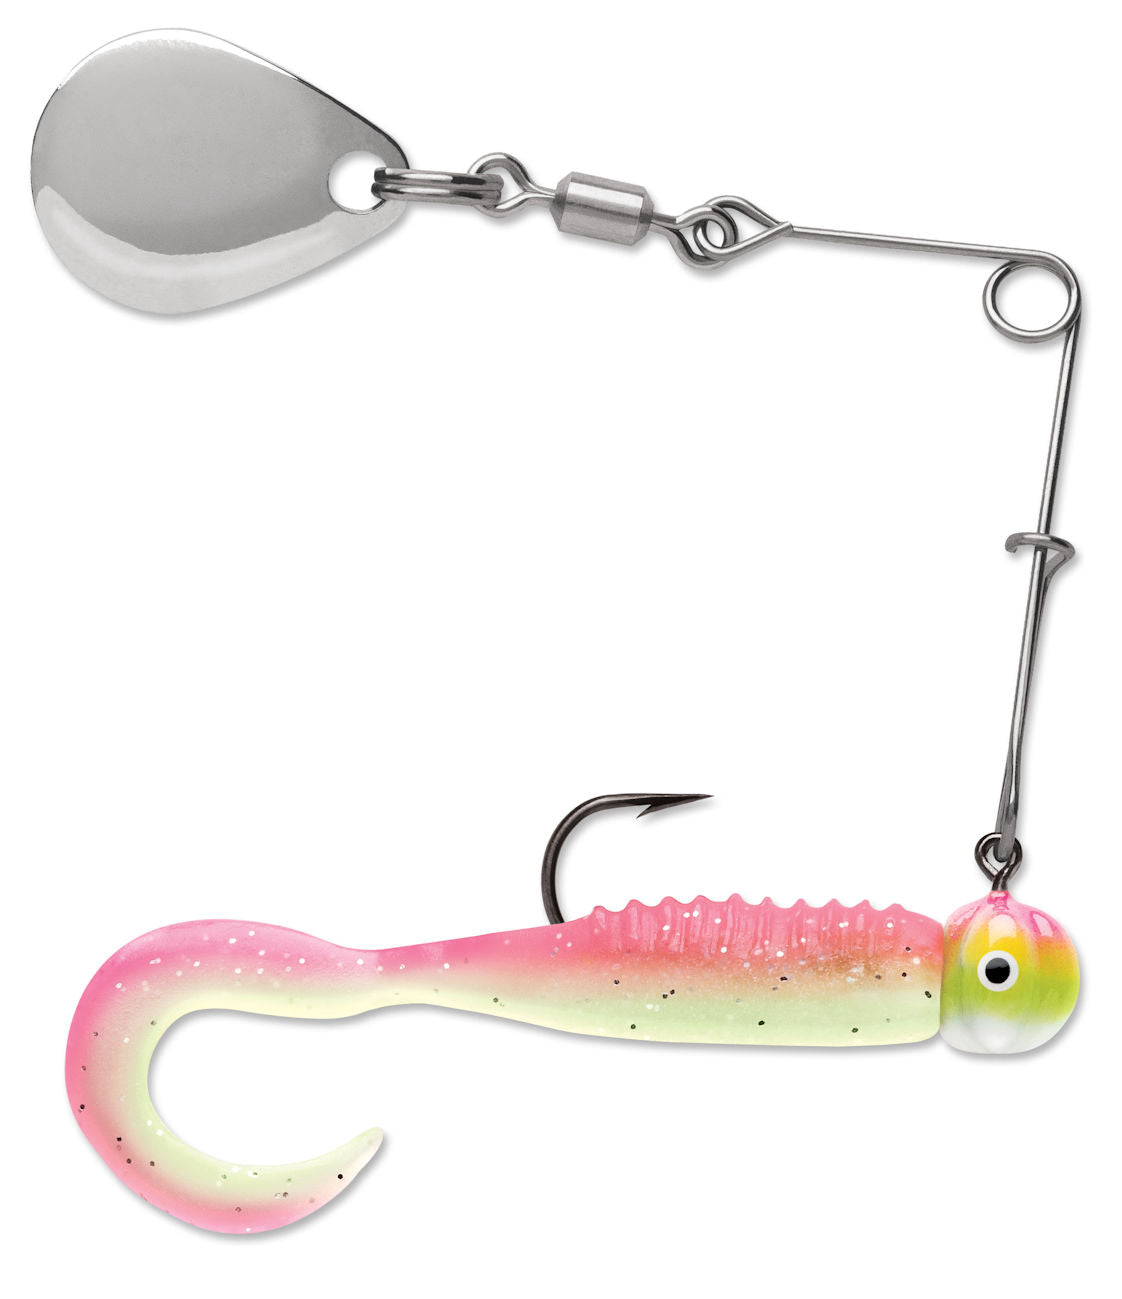 Curl Tail Spinnerbait_Pink Chartreuse Glow